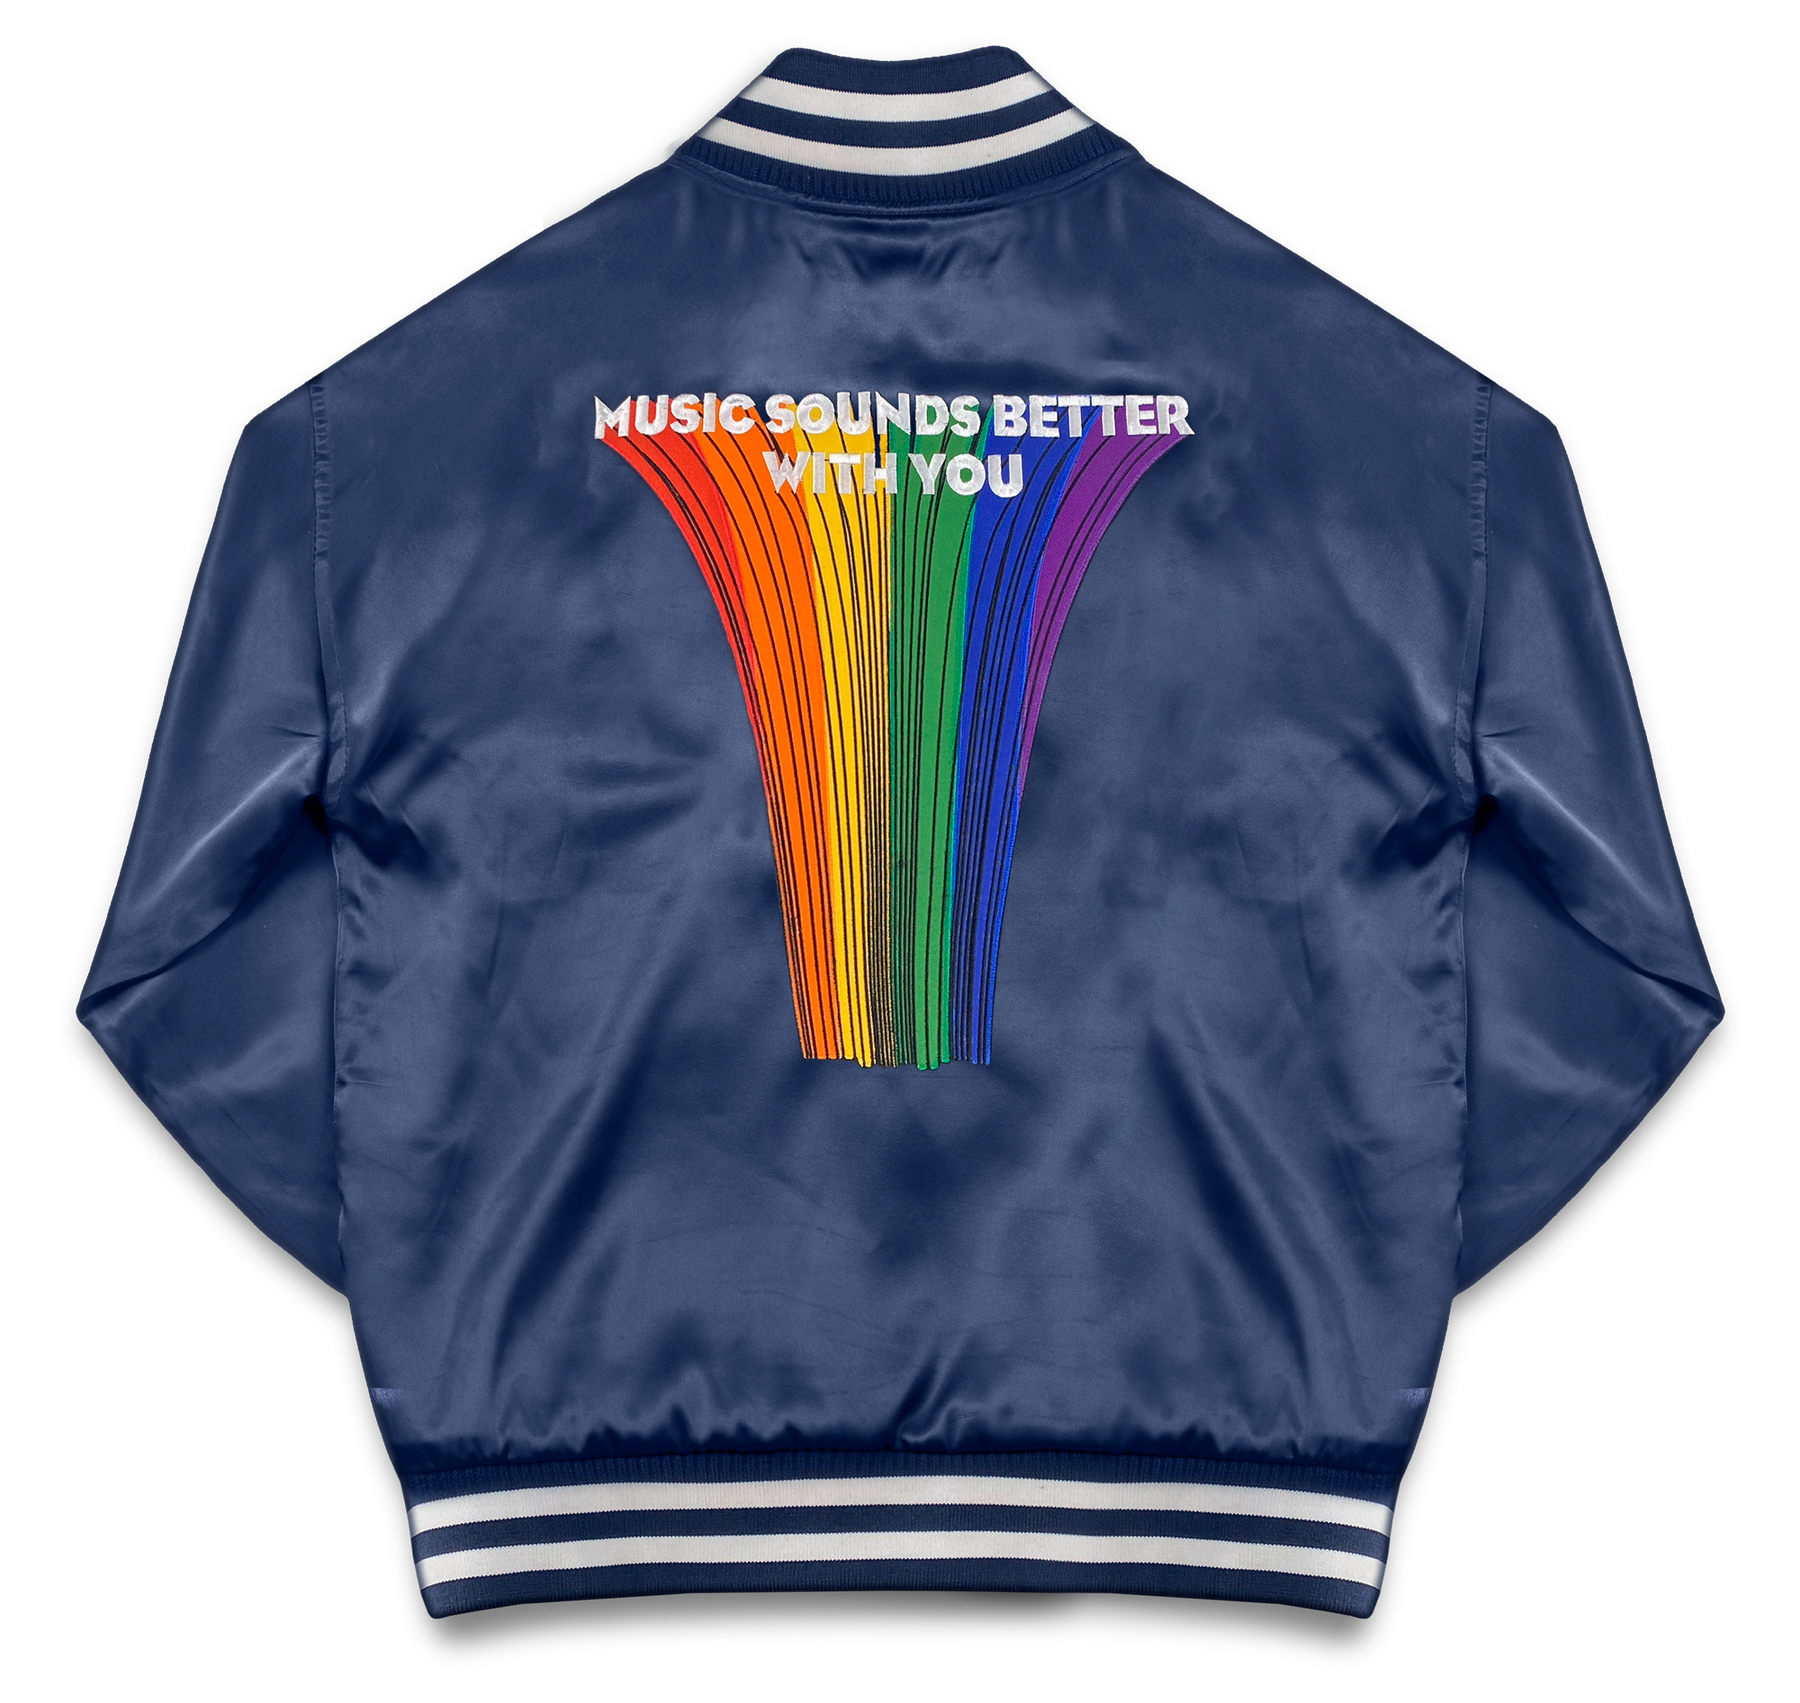 Music Sounds Better With You' Satin jacket